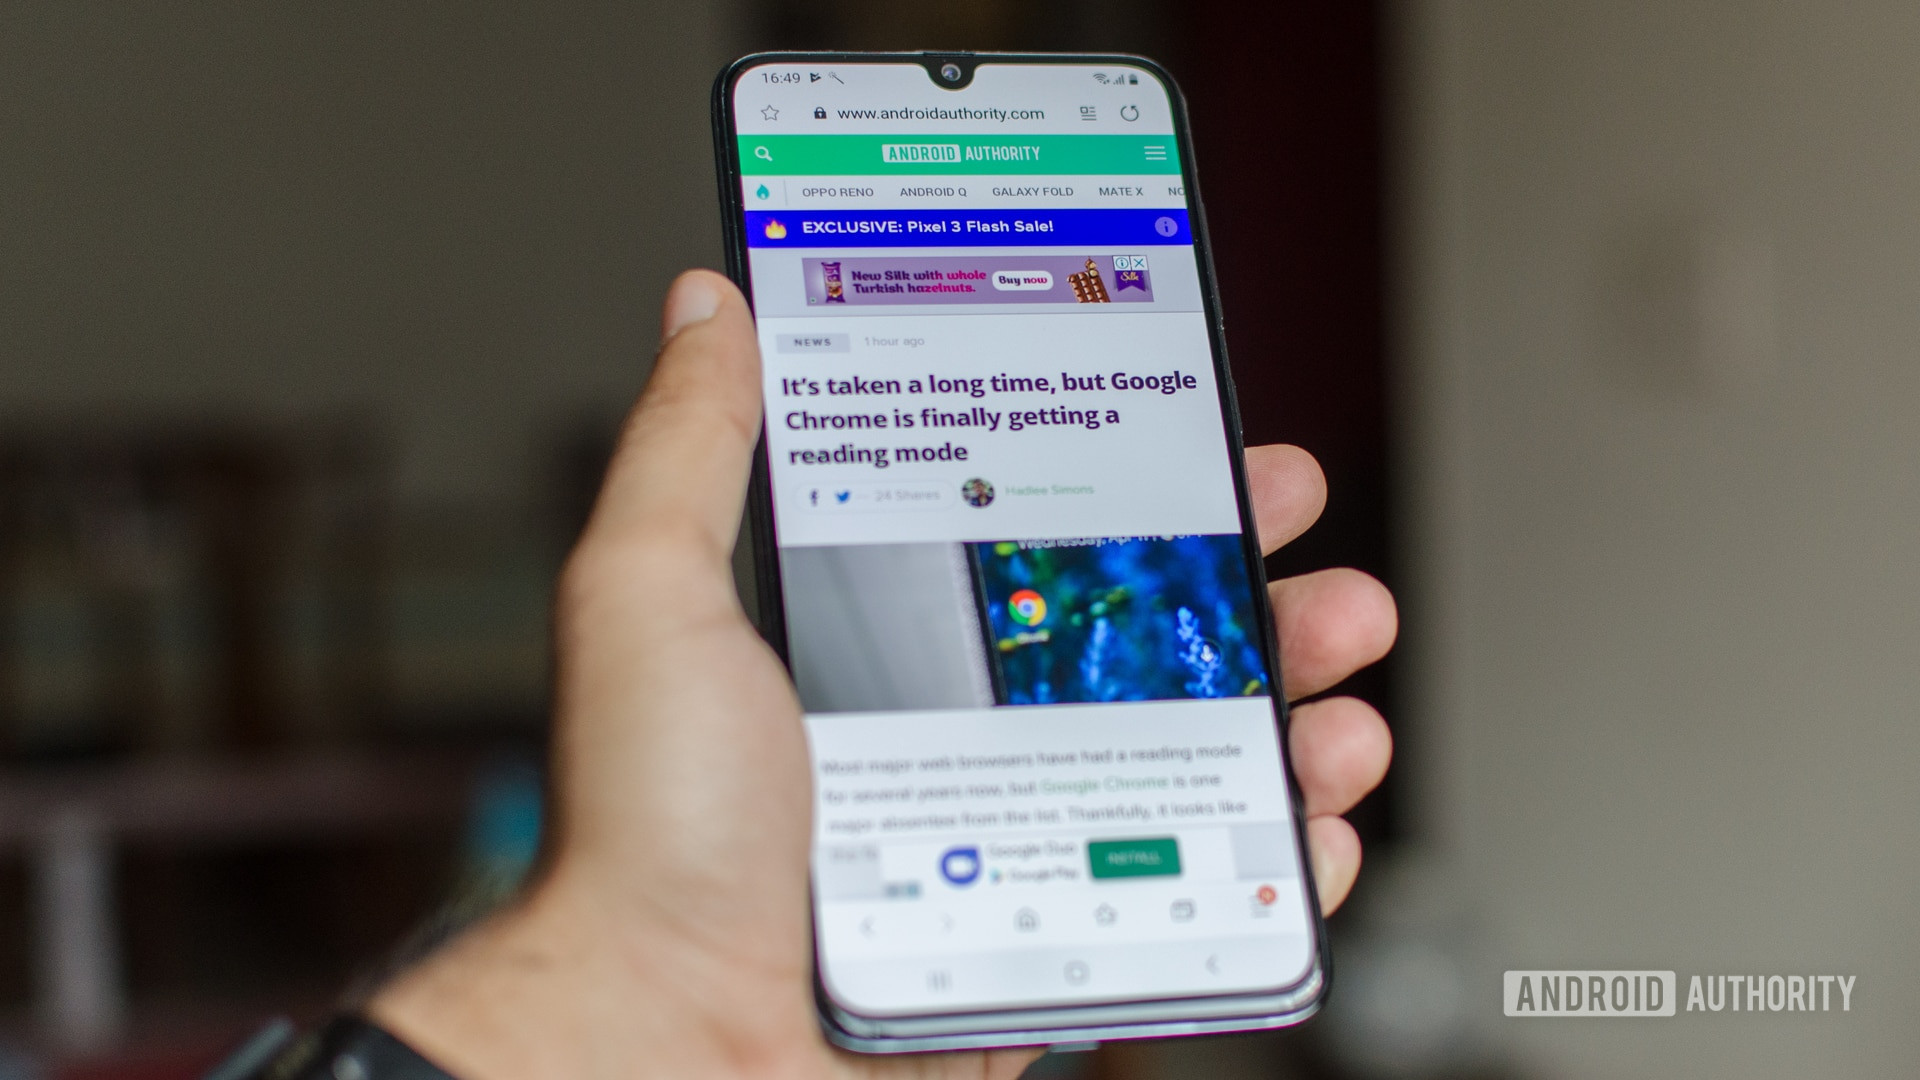 Samsung Galaxy A70 front display with web browser android authority